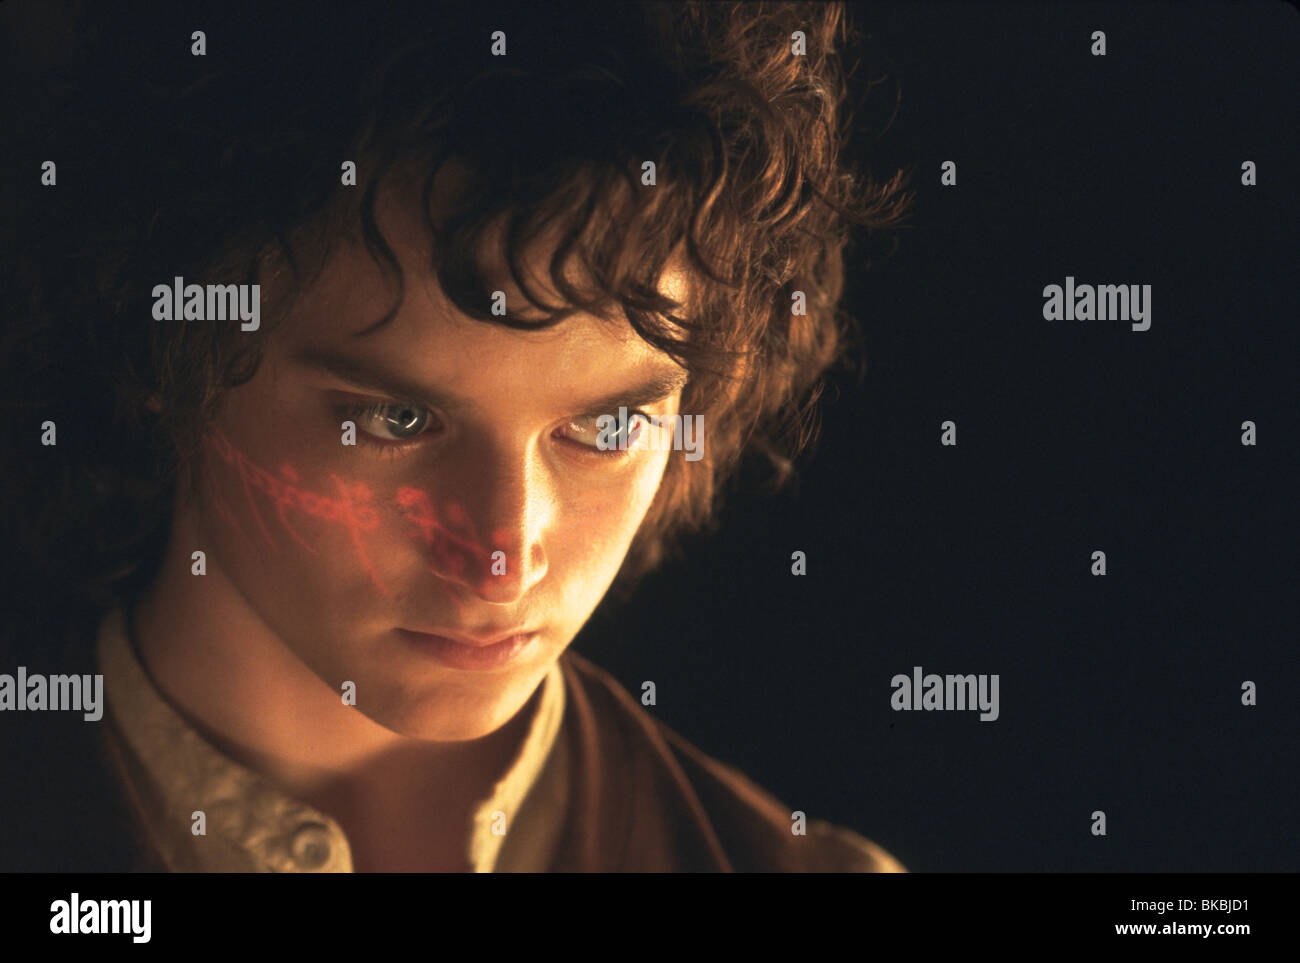 THE LORD OF THE RINGS: THE FELLOWSHIP OF THE RING (2001) ELIJAH WOOD, FRODO BAGGINS FOTR 001-32 Stock Photo